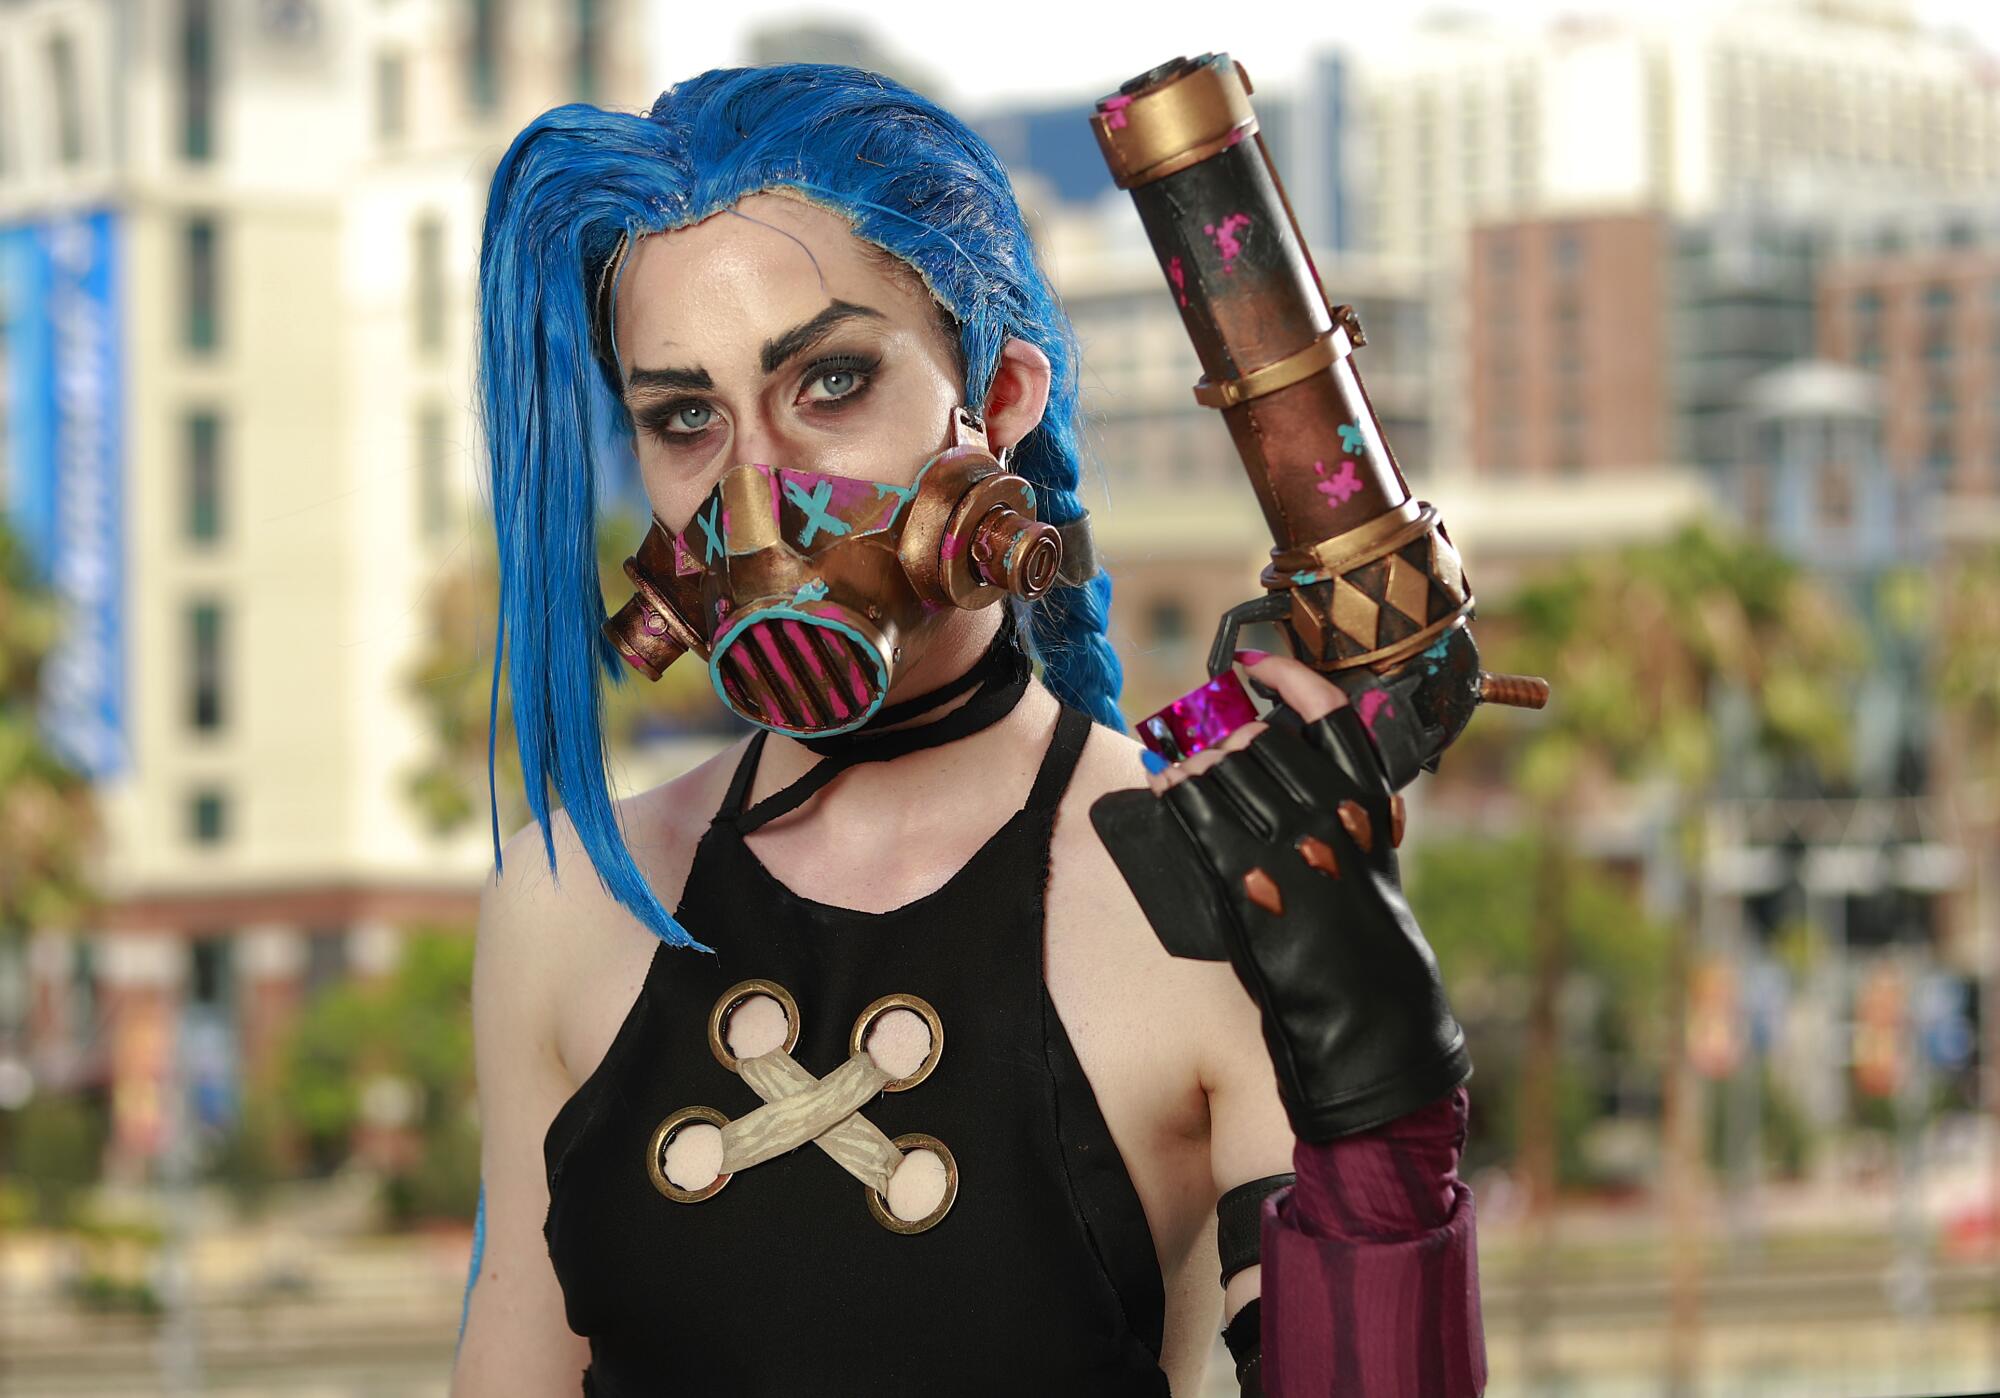 Carrie Samsen of San Diego dressed as Jinx from the series Arcane at Comic-Con.